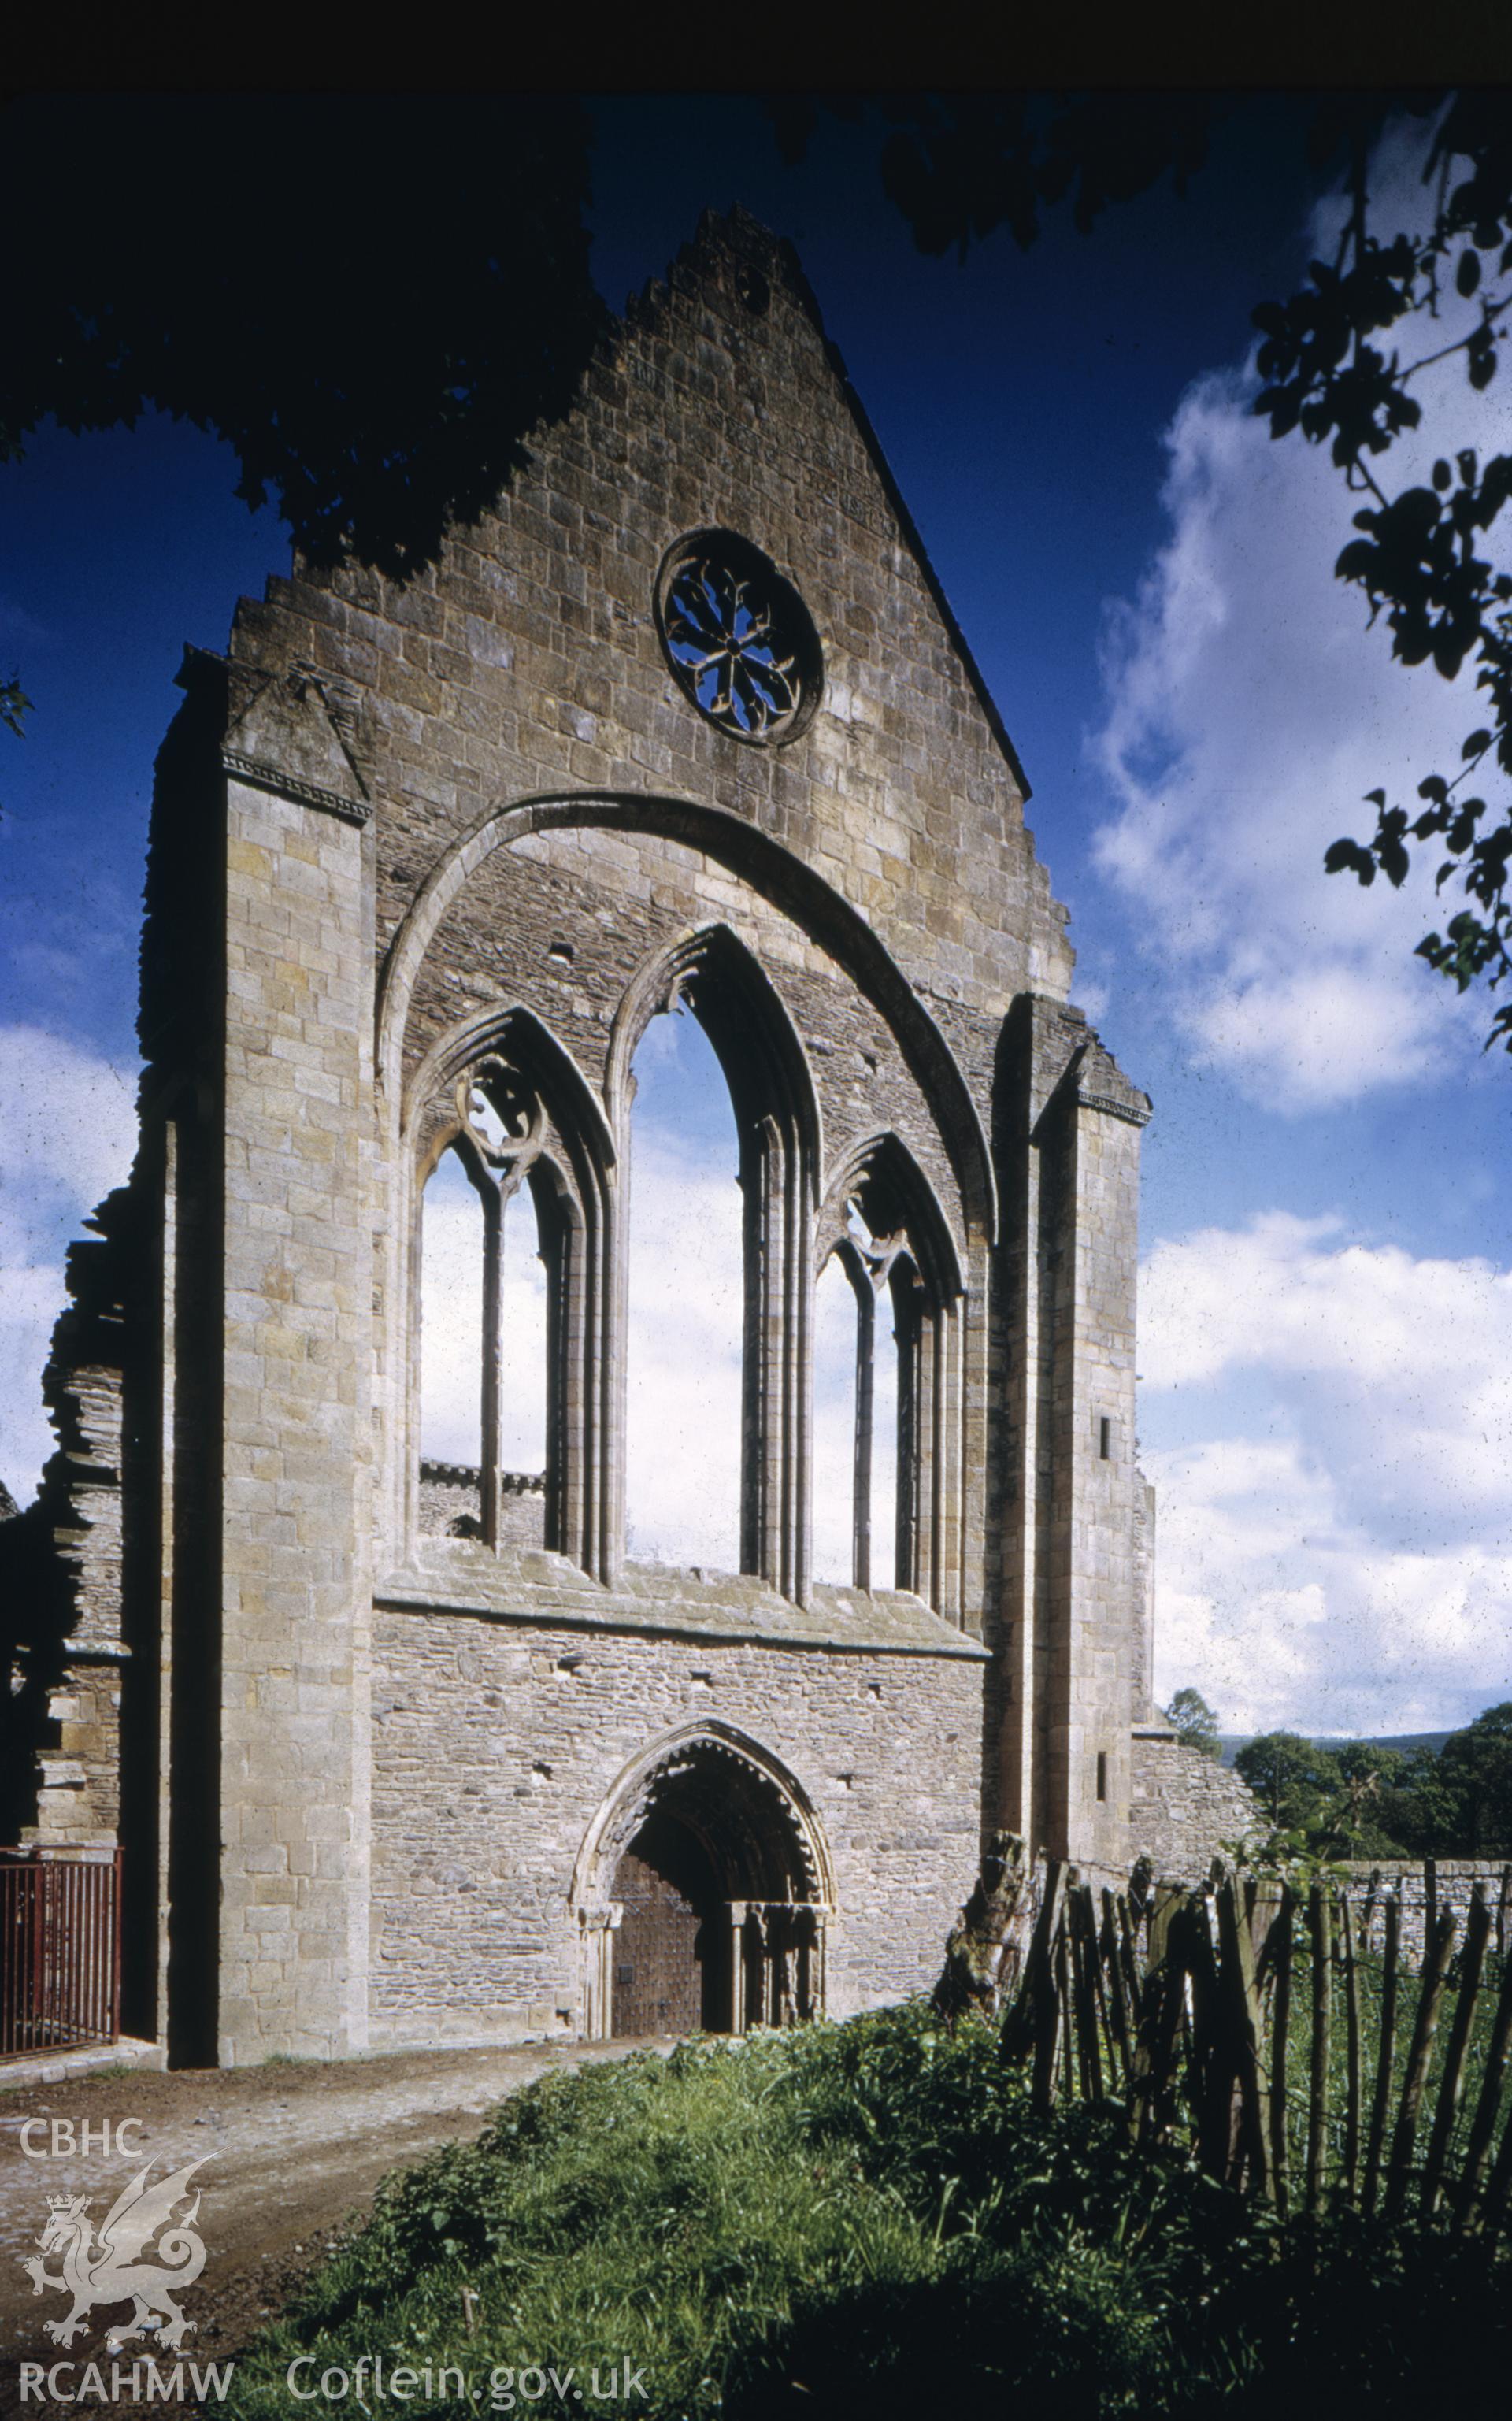 Digital copy of a colour transparency showing the west front of Valle Crucis, taken by Lawrence Butler.